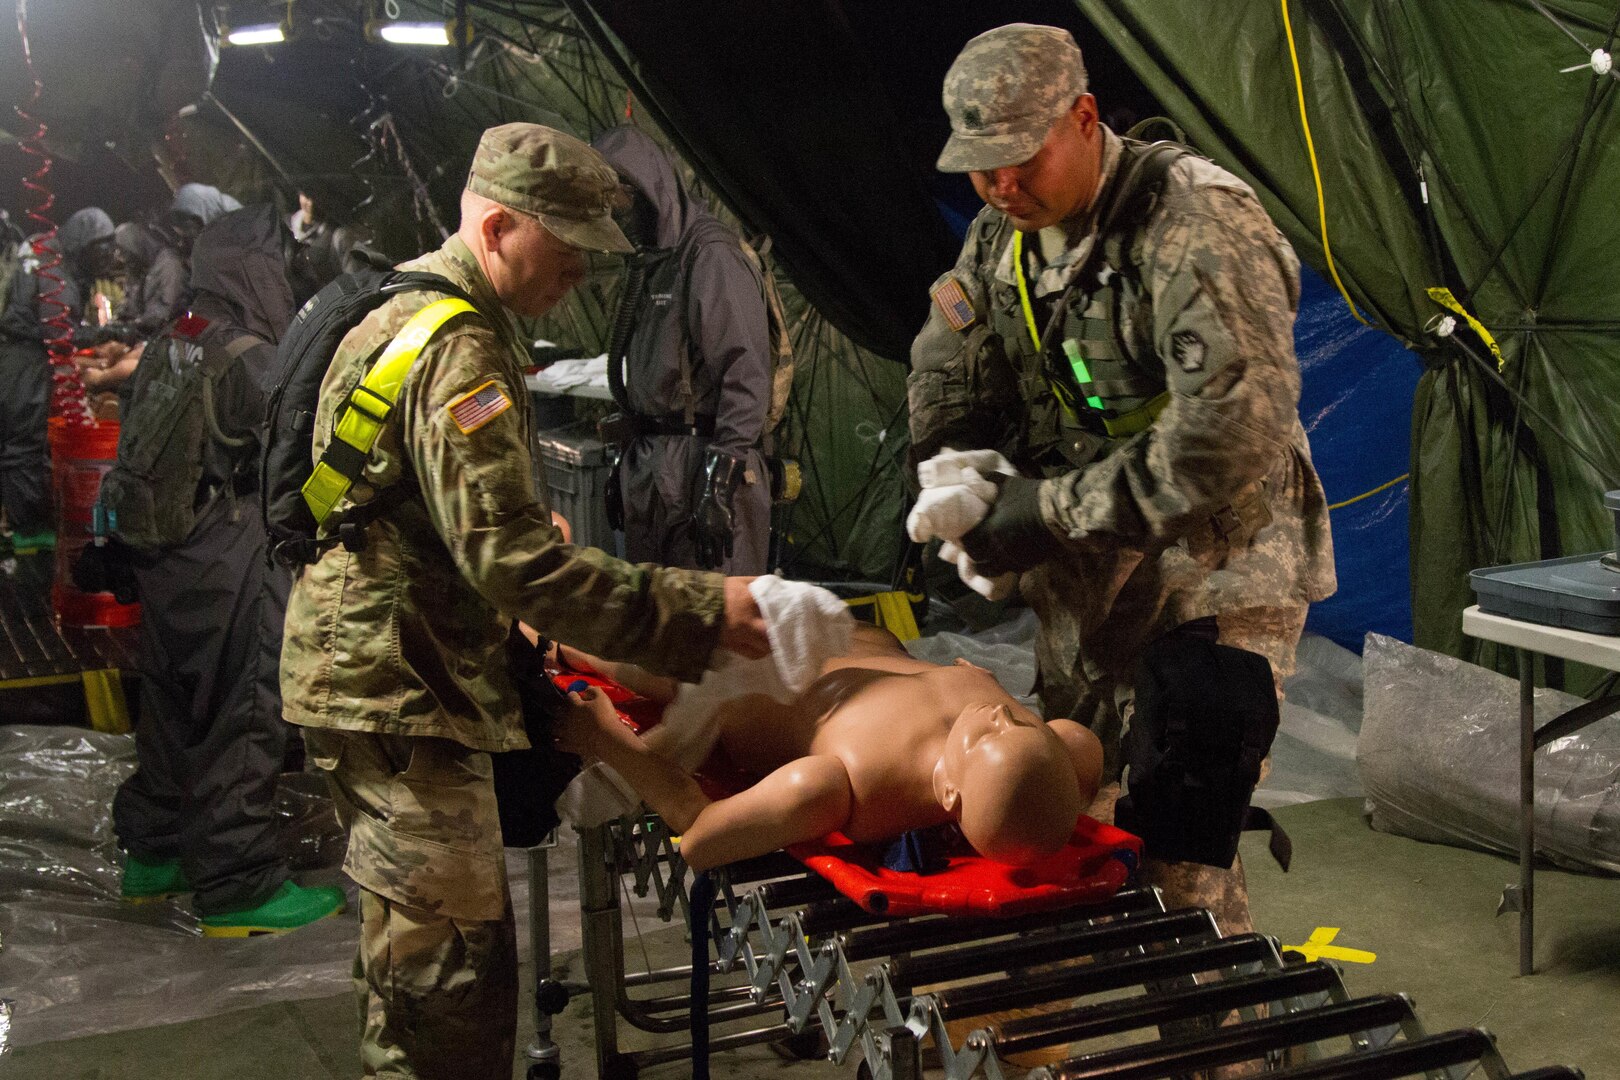 Soldiers with the 172nd Hazard Response Company from Fort Riley, Kansas, run a decontamination site Aug. 25, 2016 at Fort Hood, Texas during Exercise Sudden Response 16. The weeklong exercise was a key training event for the 172nd HR Co. and various other units within Joint Task Force Civil Support, a rapidly deployable force of more than 5,000 service members from across the country who are specially trained and equipped to provide life-saving assistance in the event of chemical, biological, radiological or nuclear disasters in the U.S. (U.S. Army photo by Sgt. Marcus Floyd, 13th Public Affairs Detachment)